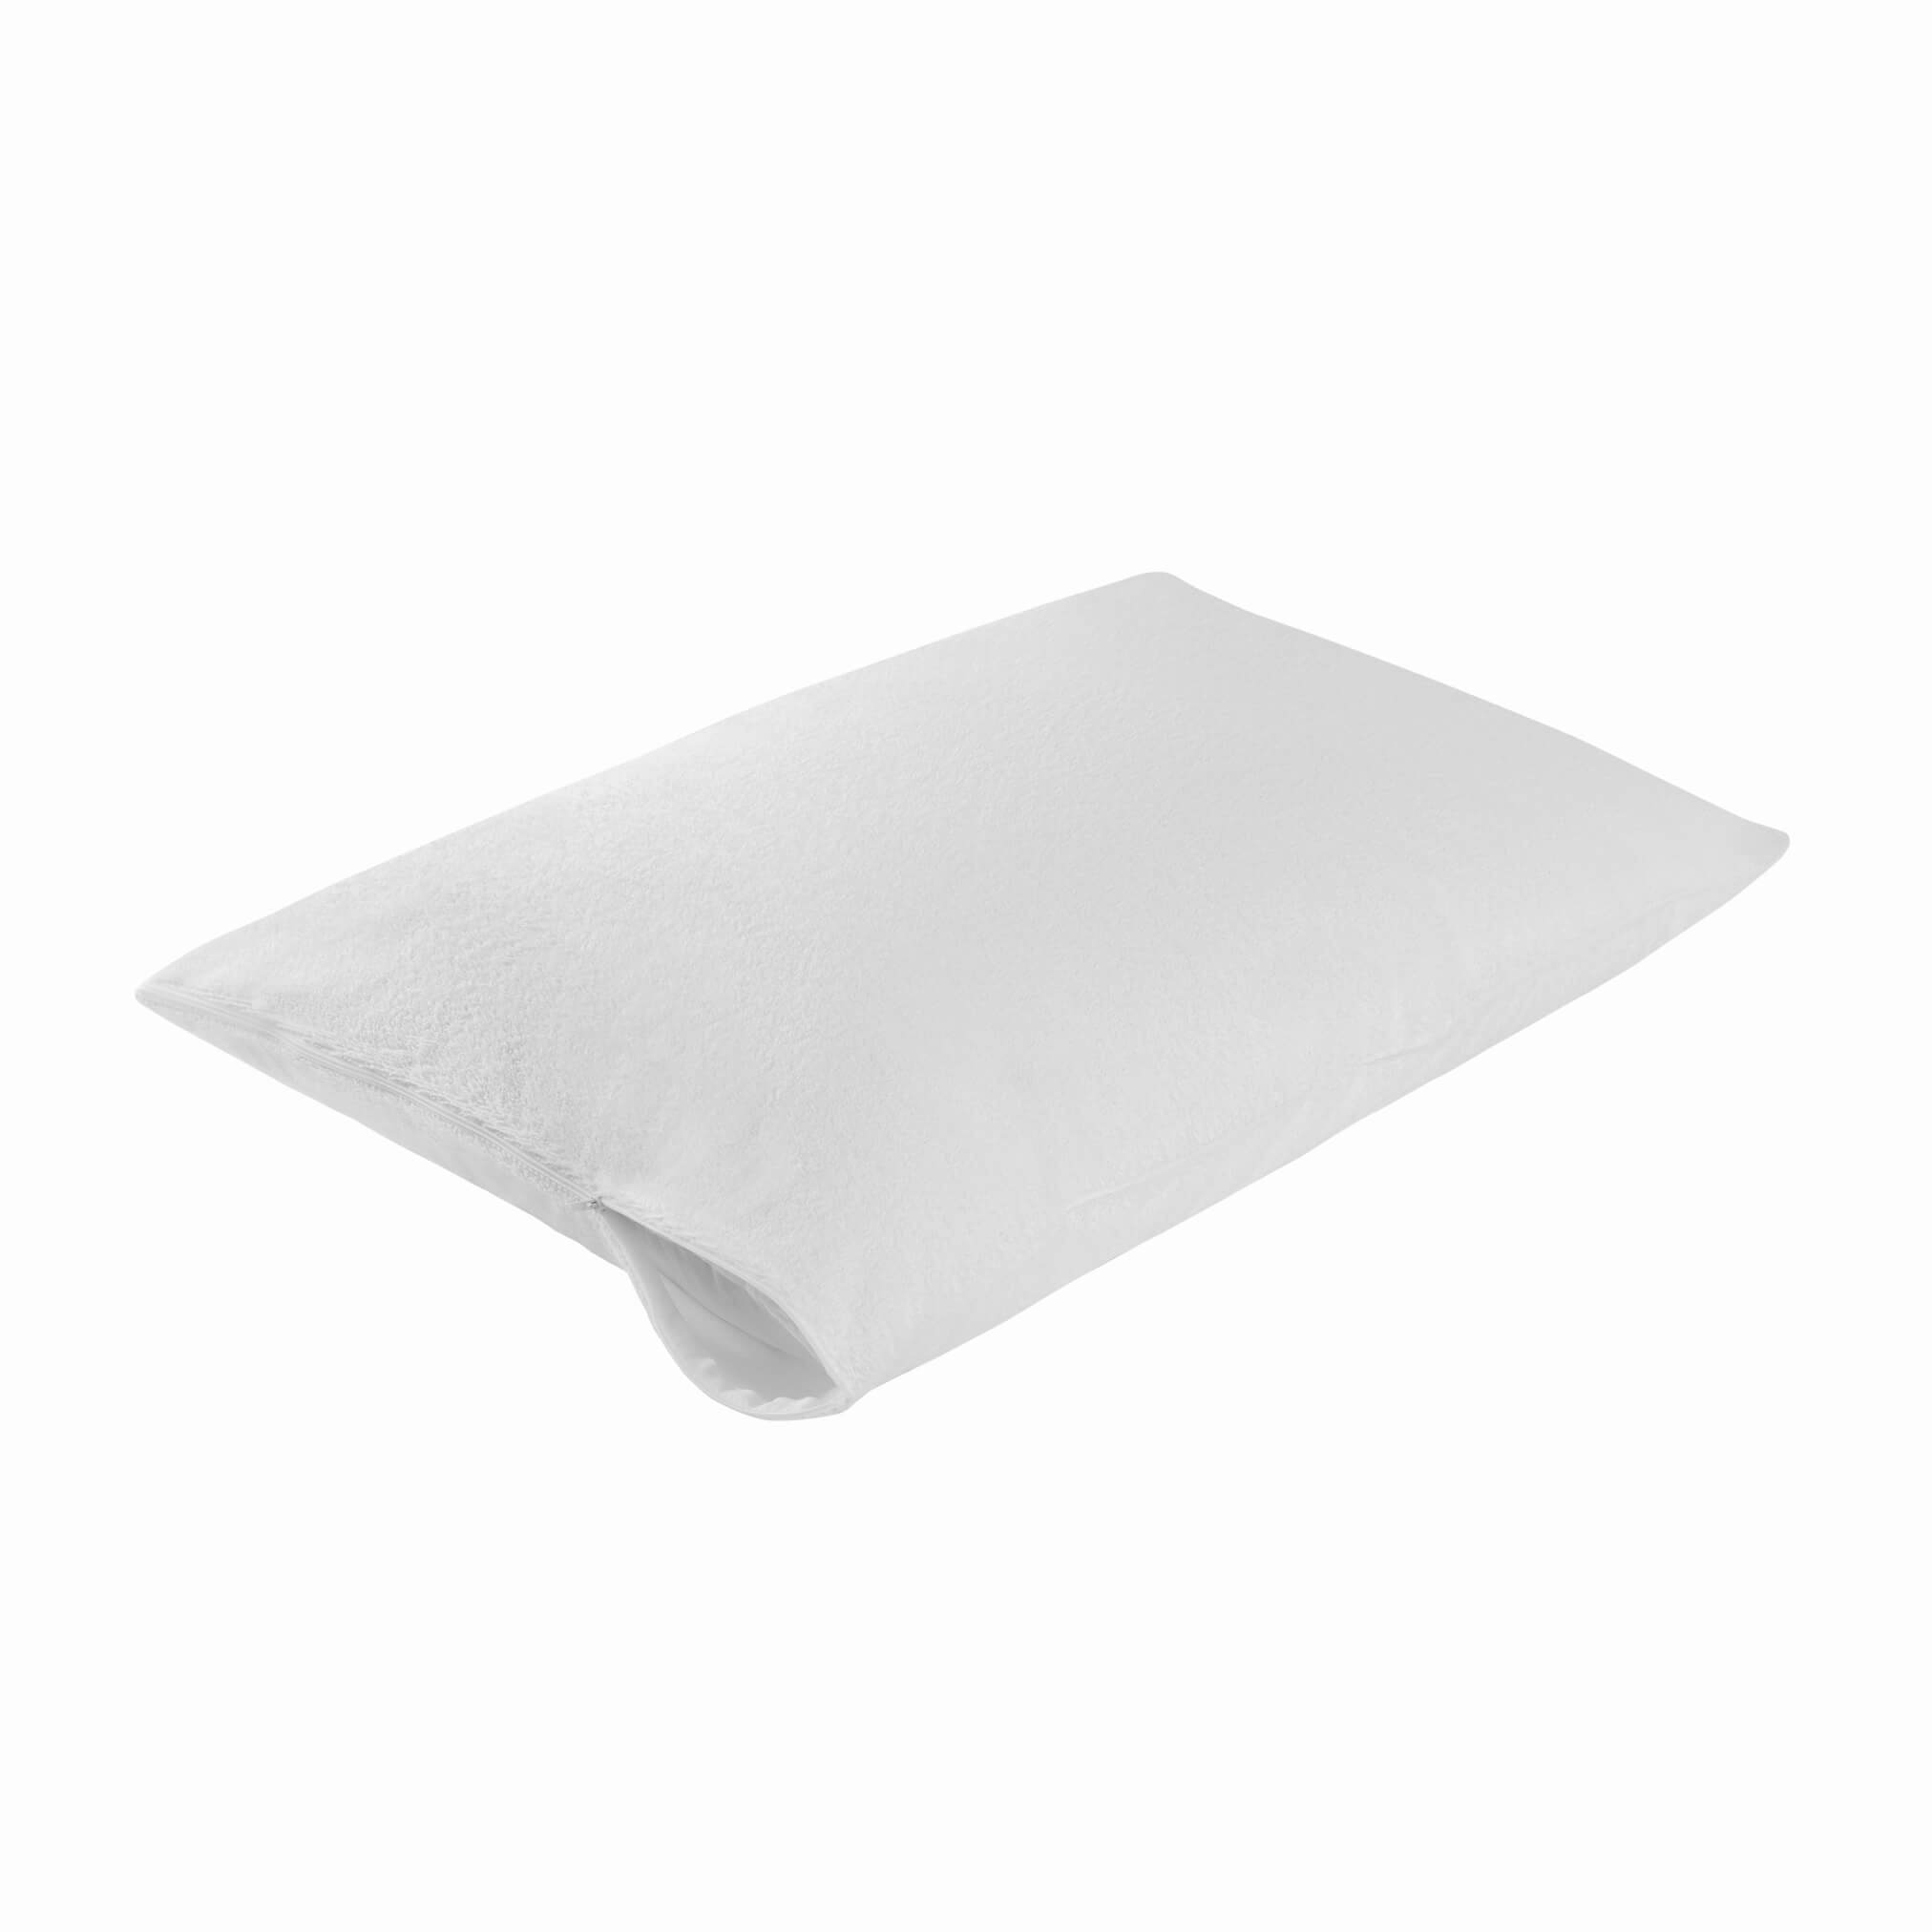 Terry Waterproof Pillow Covers - Enhanced Protection Within your Budget Pillow Protector Bargoose Home Textiles, Inc. 